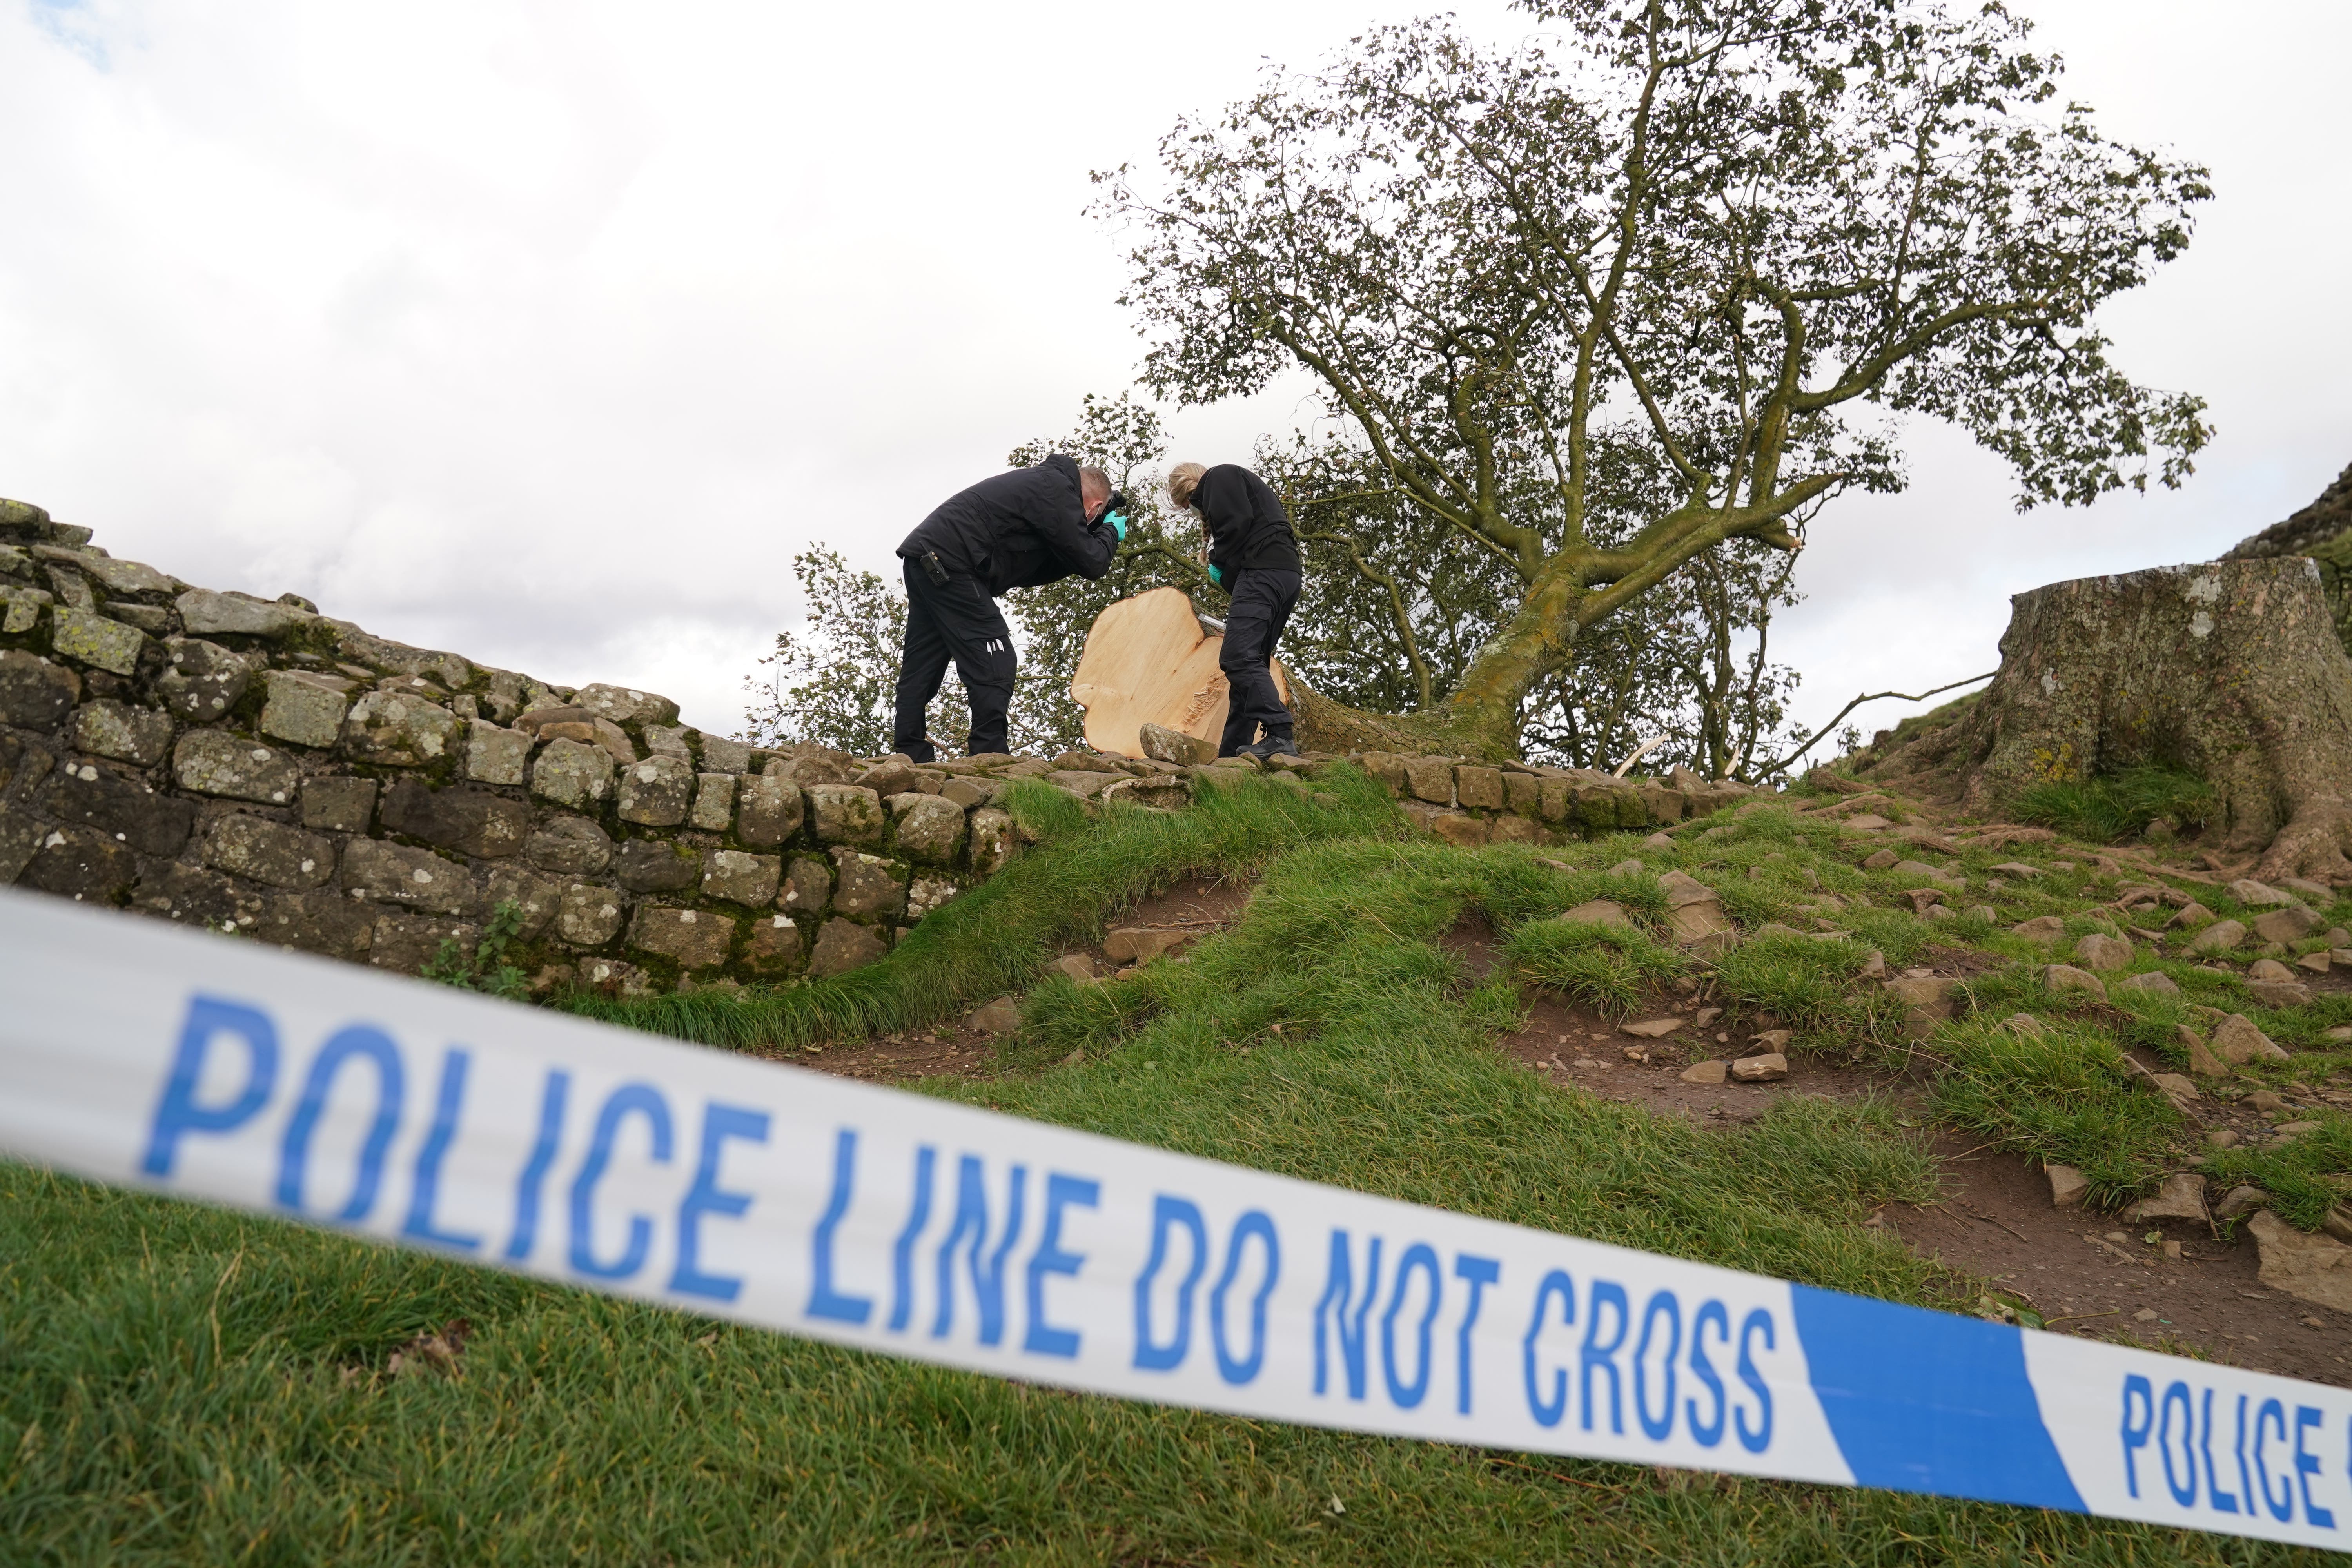 When the tree was felled, Historic England carried out an analysis of the site and found that Hadrian’s Wall suffered damage when the 50ft tree fell on it